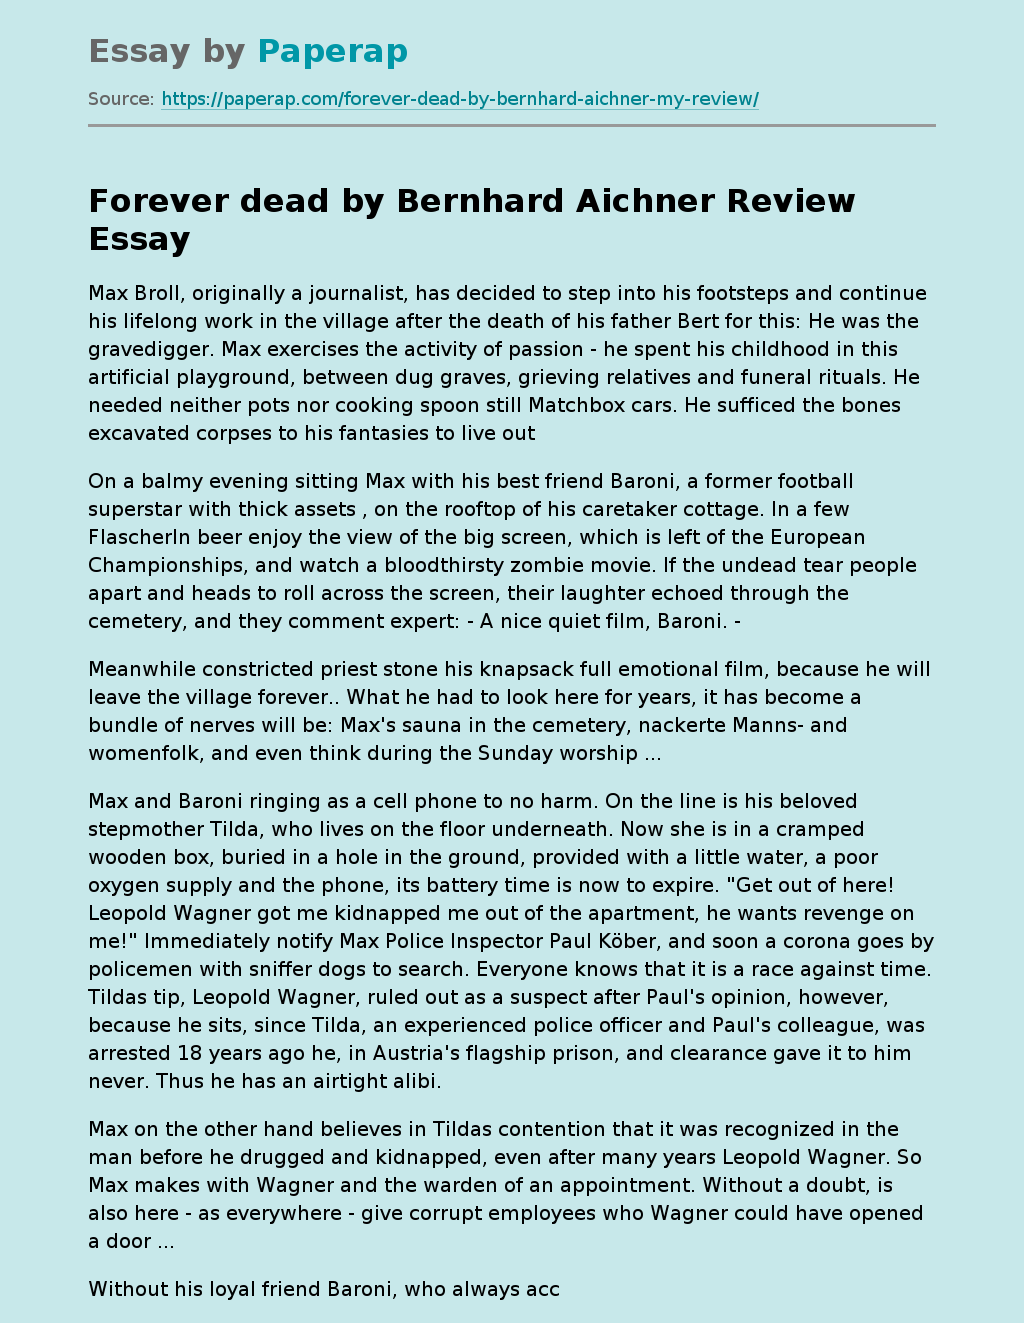 Forever Dead by Bernhard Aichner Review